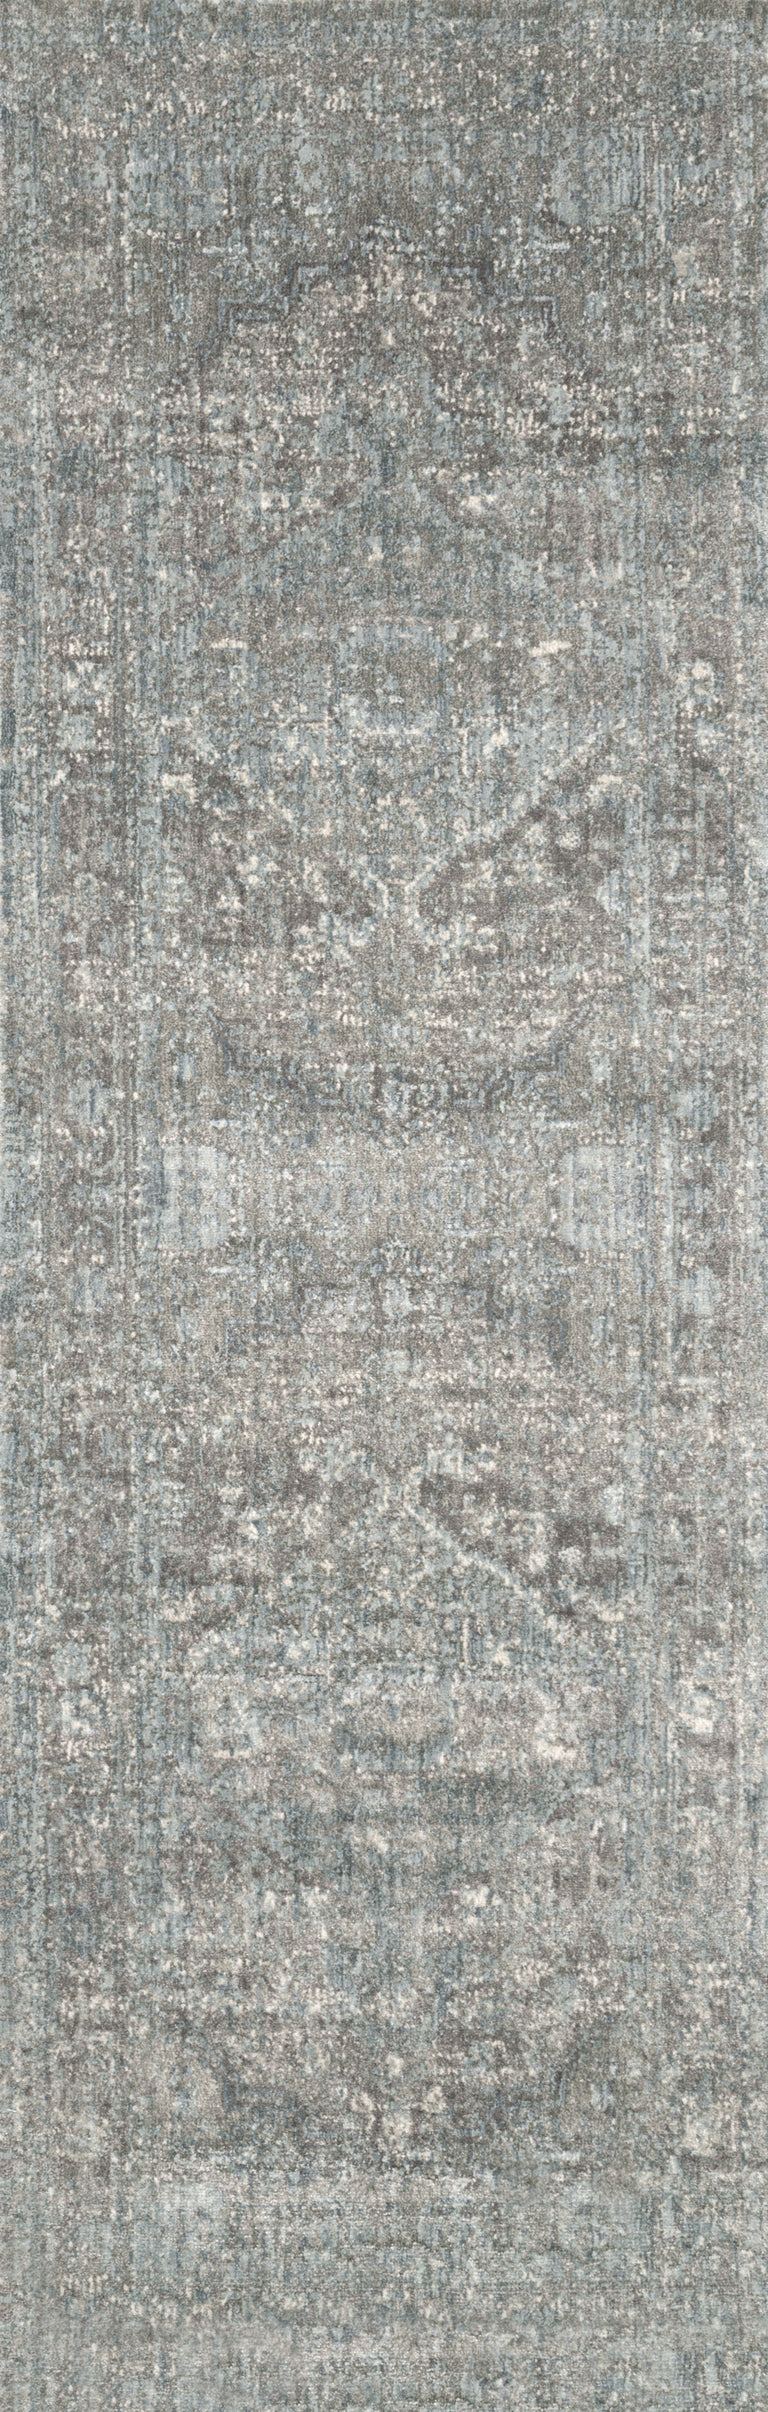 Loloi Rugs Anastasia Collection Rug in Stone, Blue - 9'6" x 9'6"